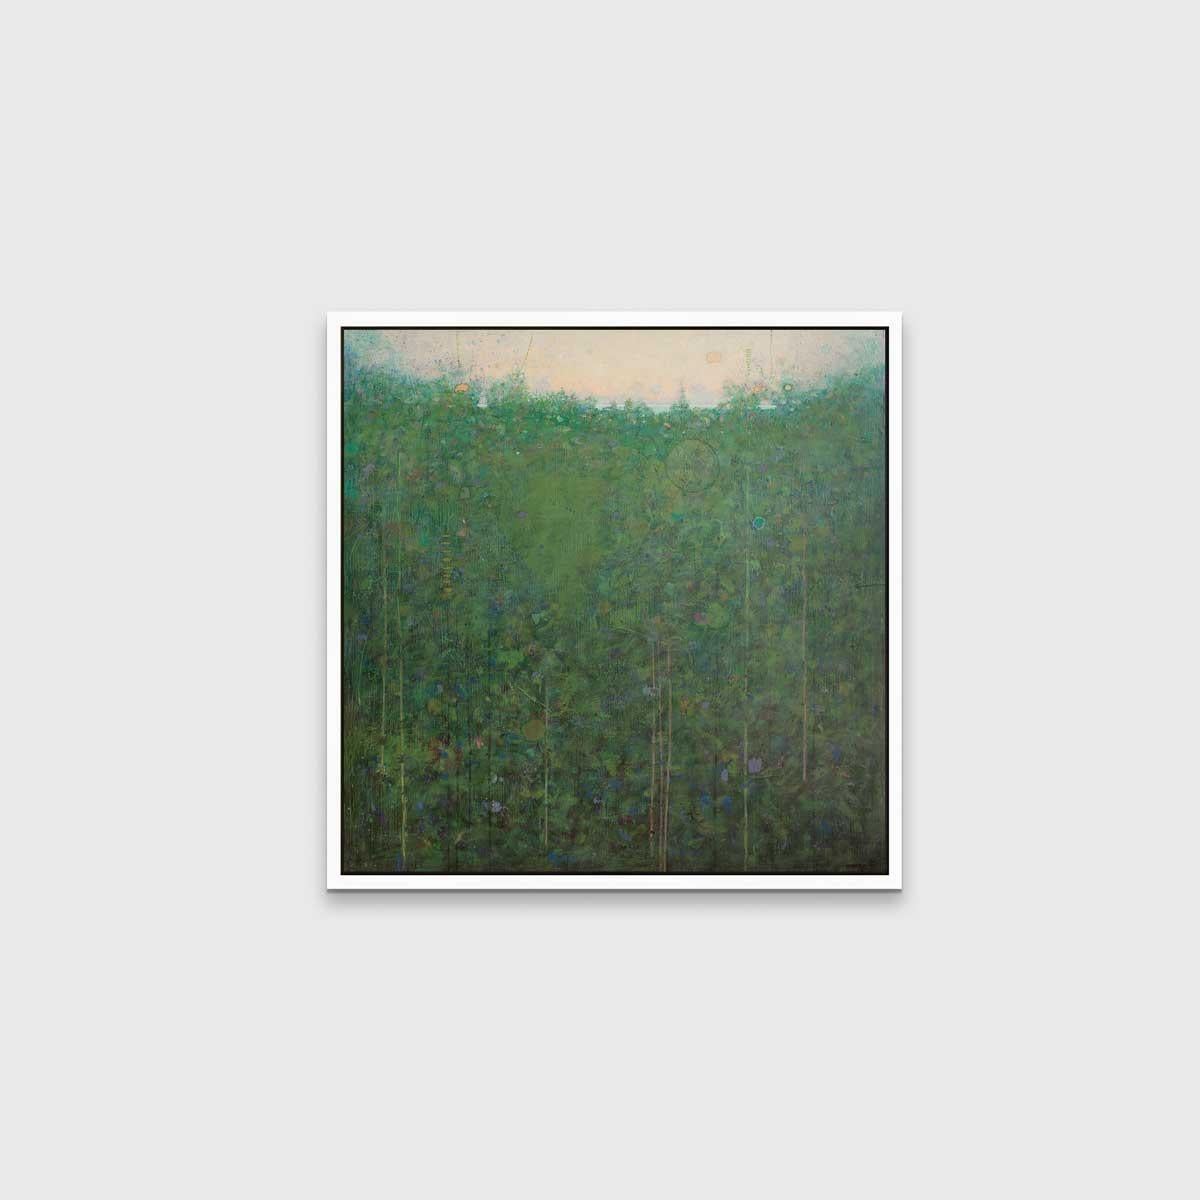 This abstract, limited edition print by Elwood Howell features a predominantly green palette, with a muted yellow area at the top of the composition. Subtle circle shapes and long vertical lines are sporadically placed throughout the green area,